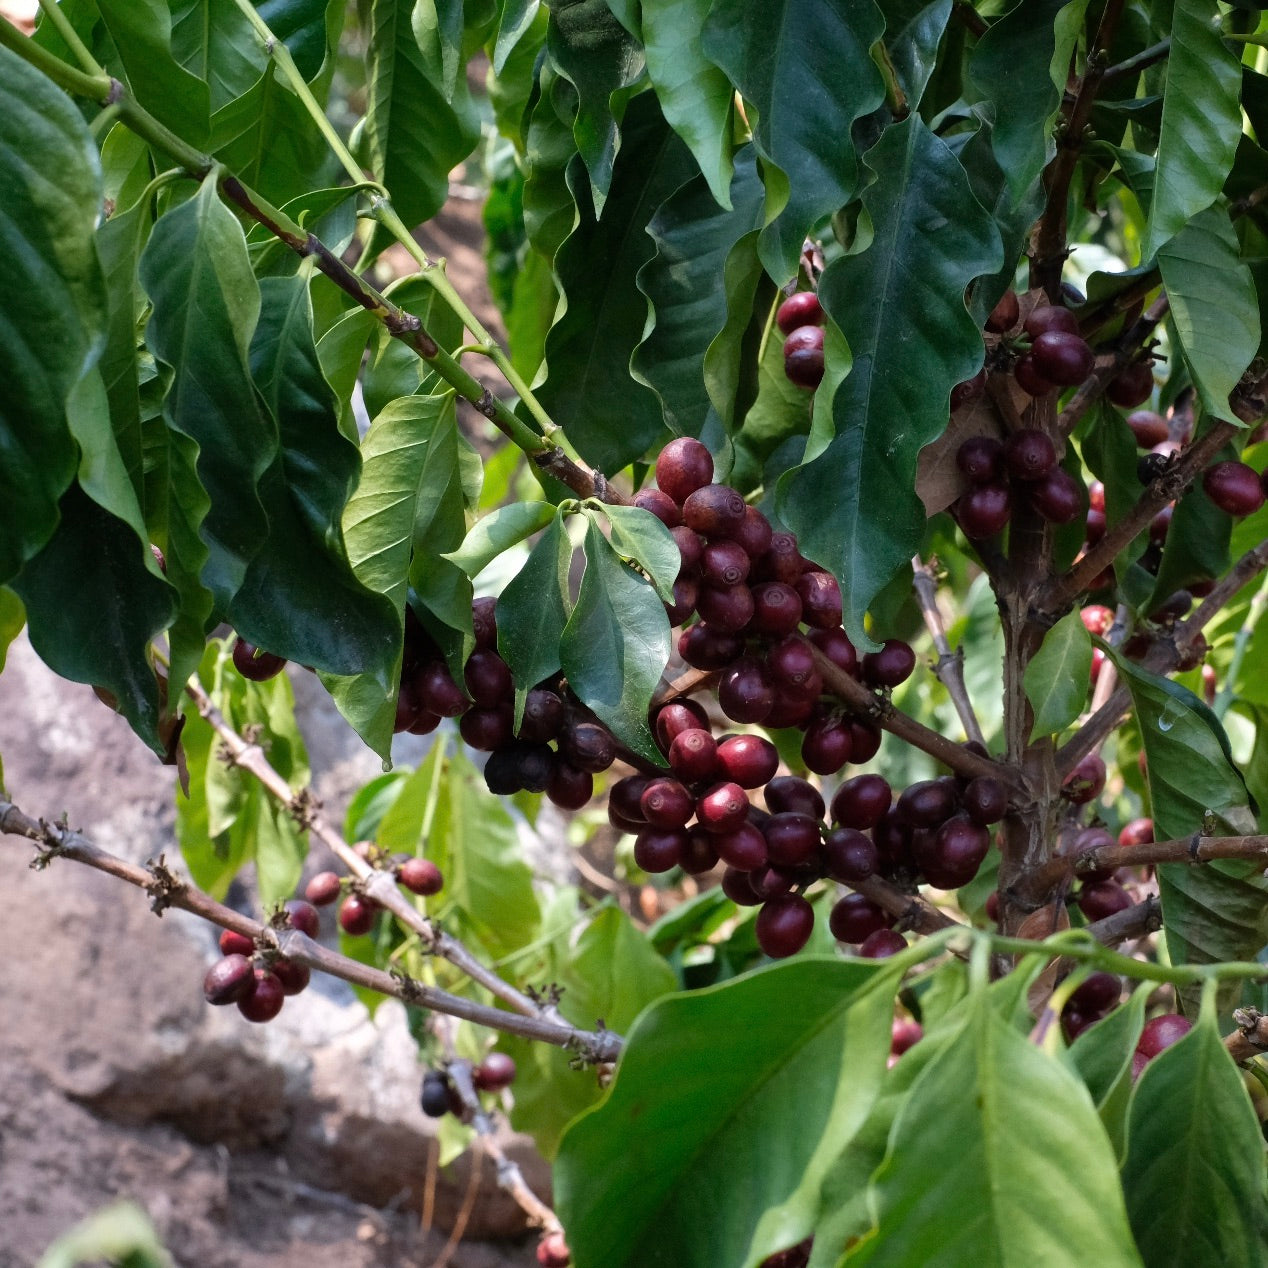 Deep red coffee cherries growing at La Colina